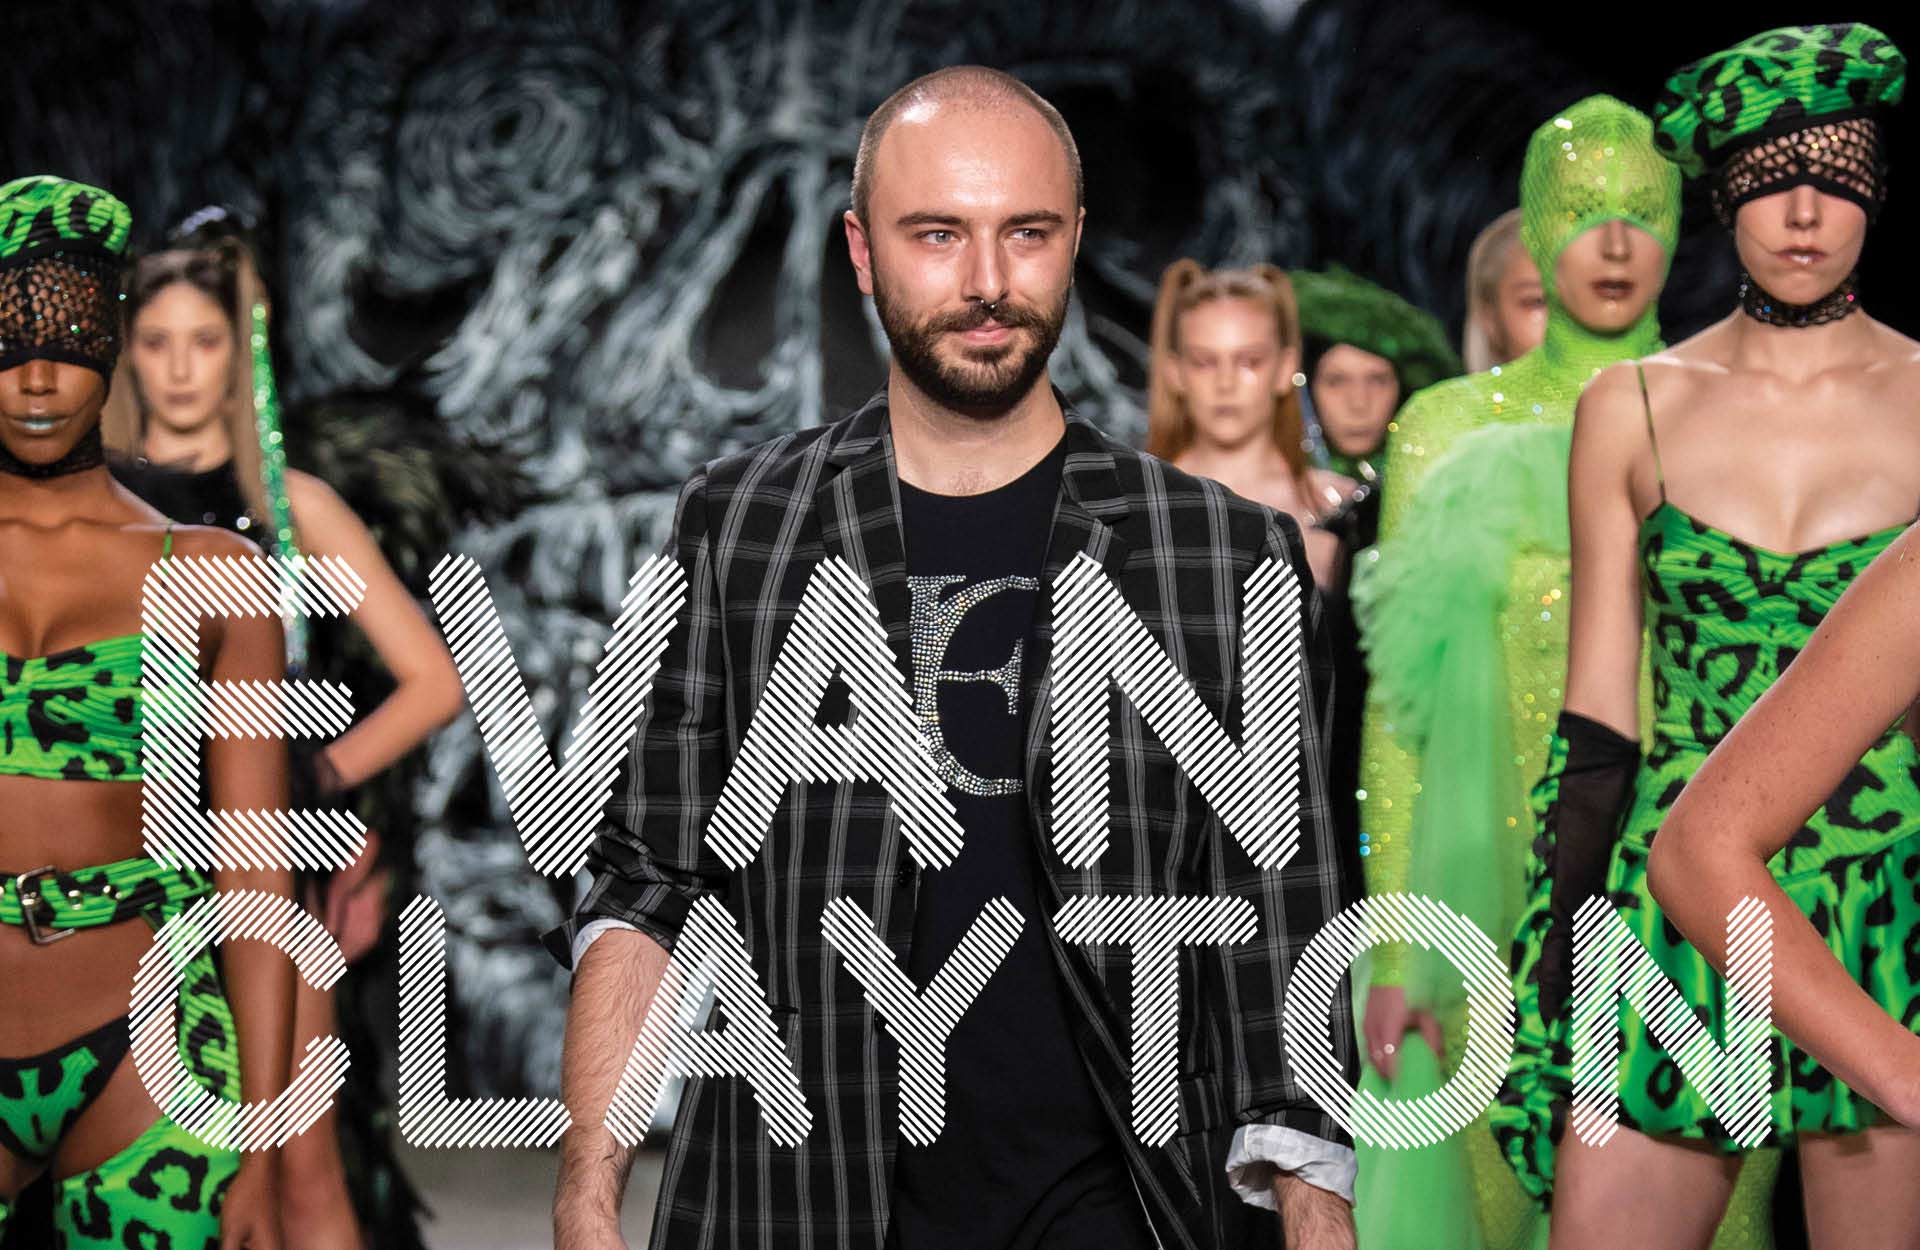 Evan Clayton: Canada’s Own Drag Fashion Visionary, Makes It To The Drag Race Stage